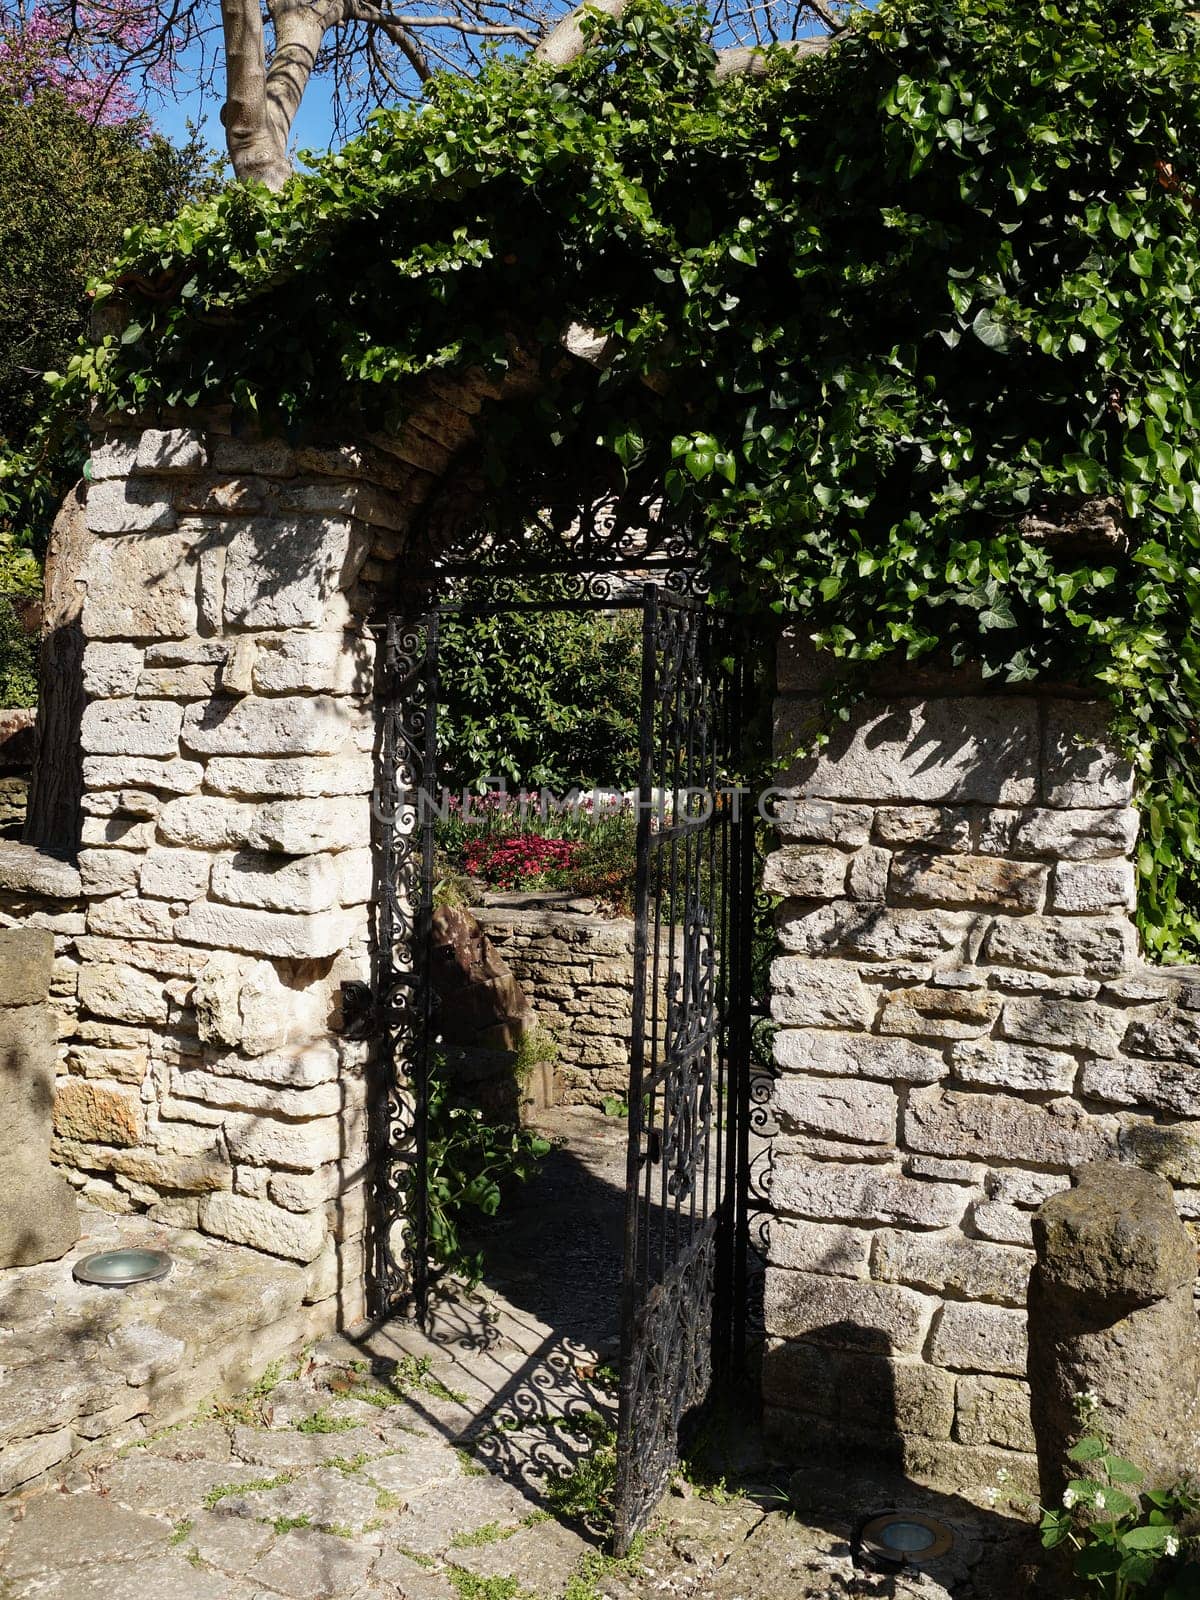 forged iron wicket in a stone wall overgrown with green creeping plants by Annado